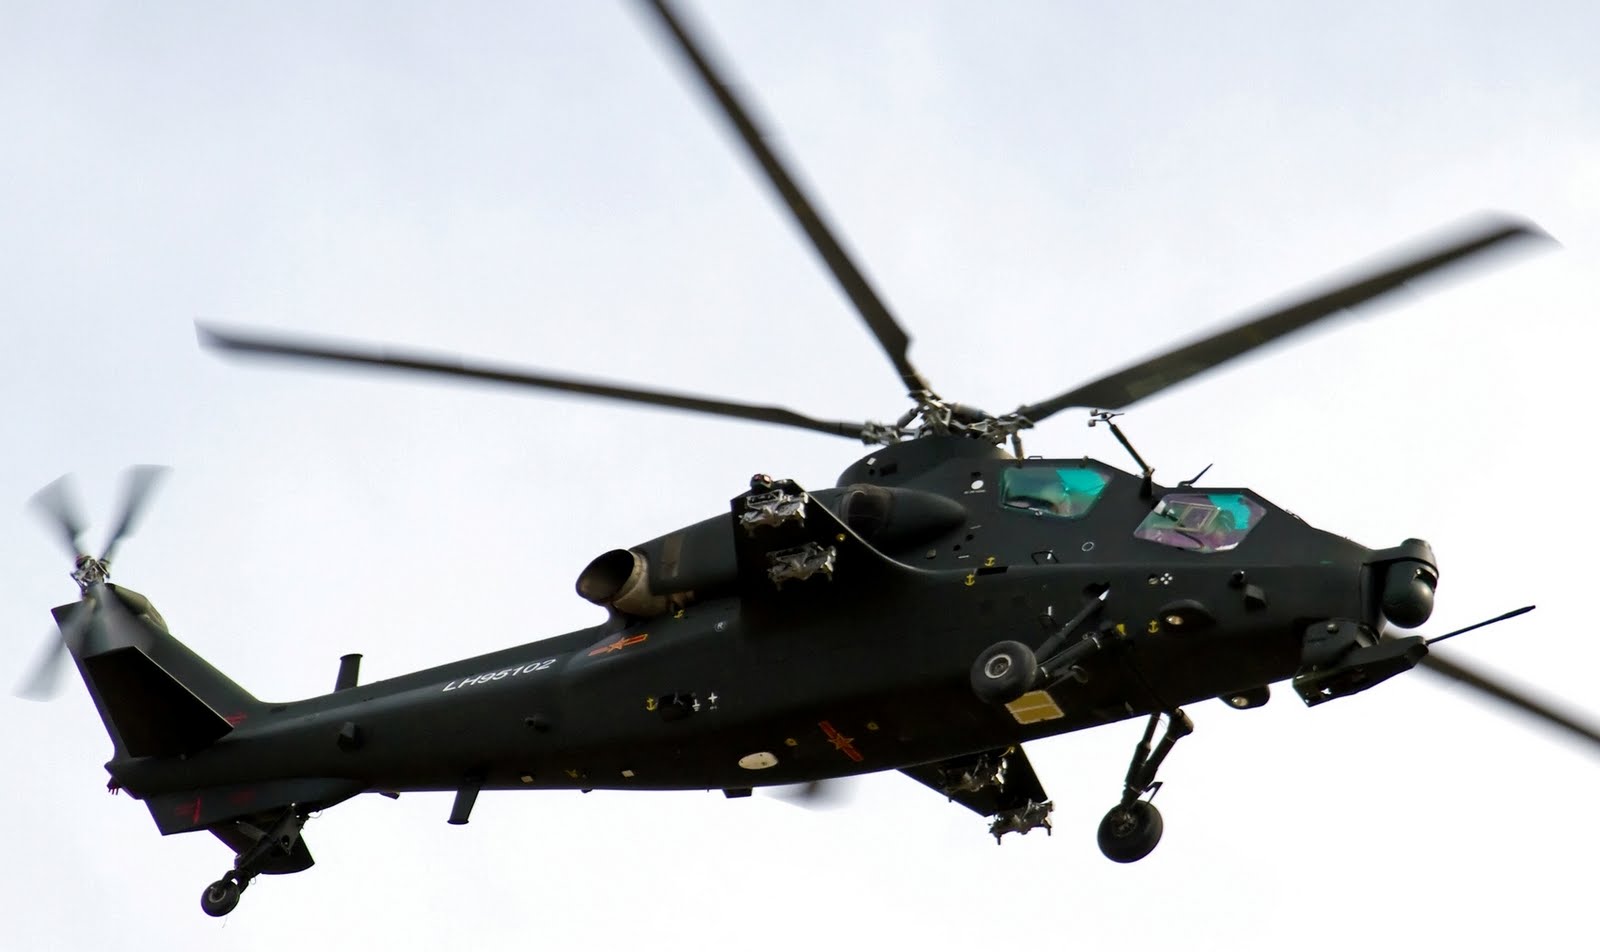 Helicopter News - Página 13 Chinese++Z-10+Attack+Helicopter++gunship+PLA+PLAAF+%25285%2529